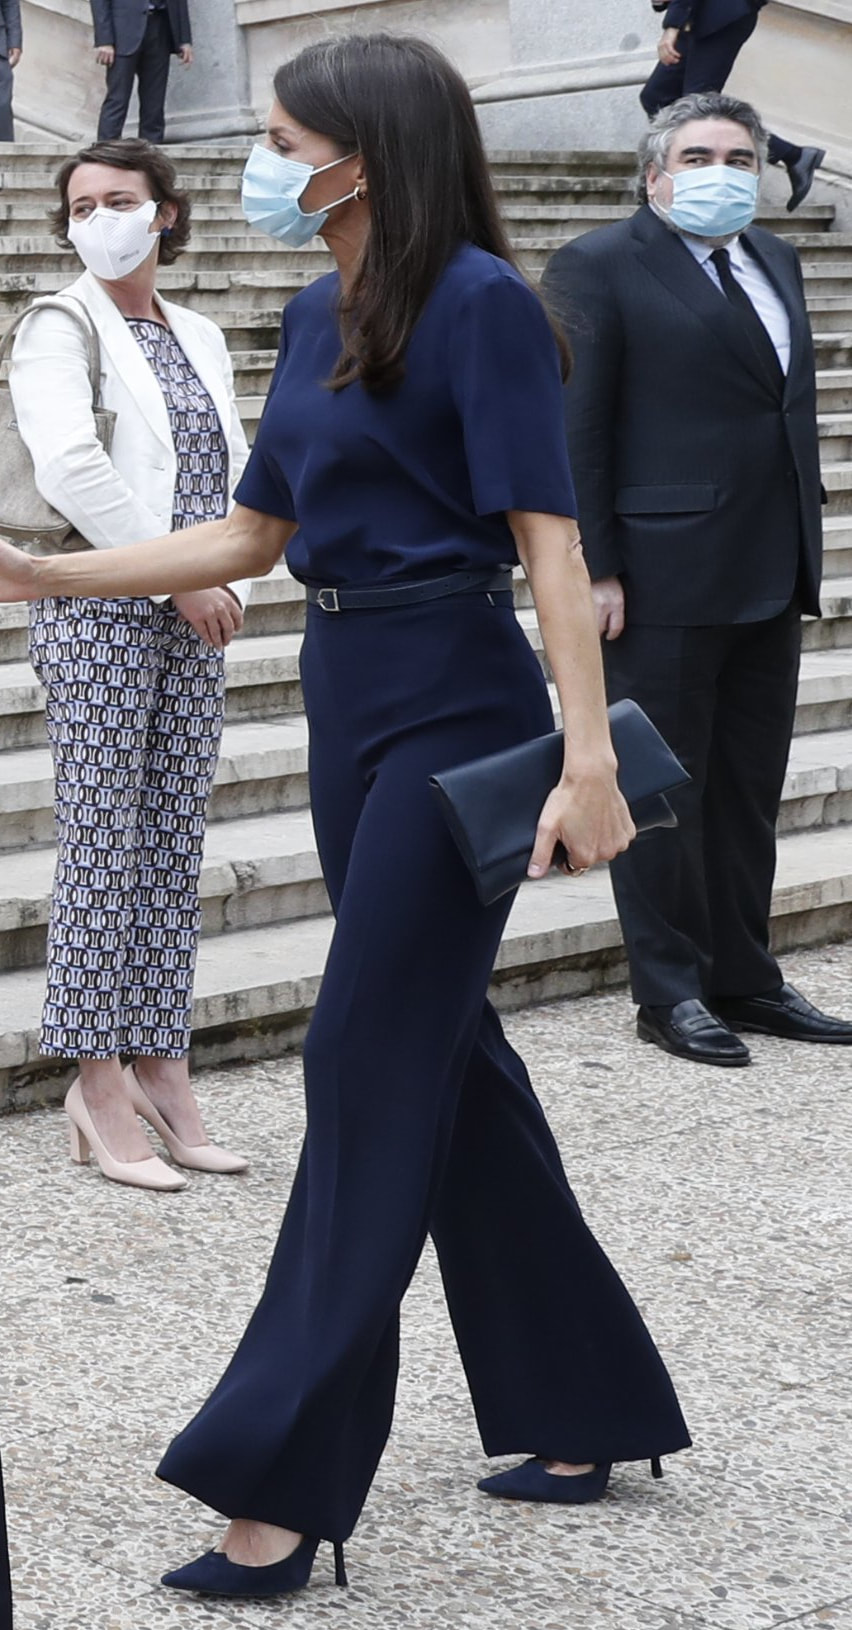 Queen Letizia wears all-navy outfit for visit to the National Library of Spain on 4 June 2020